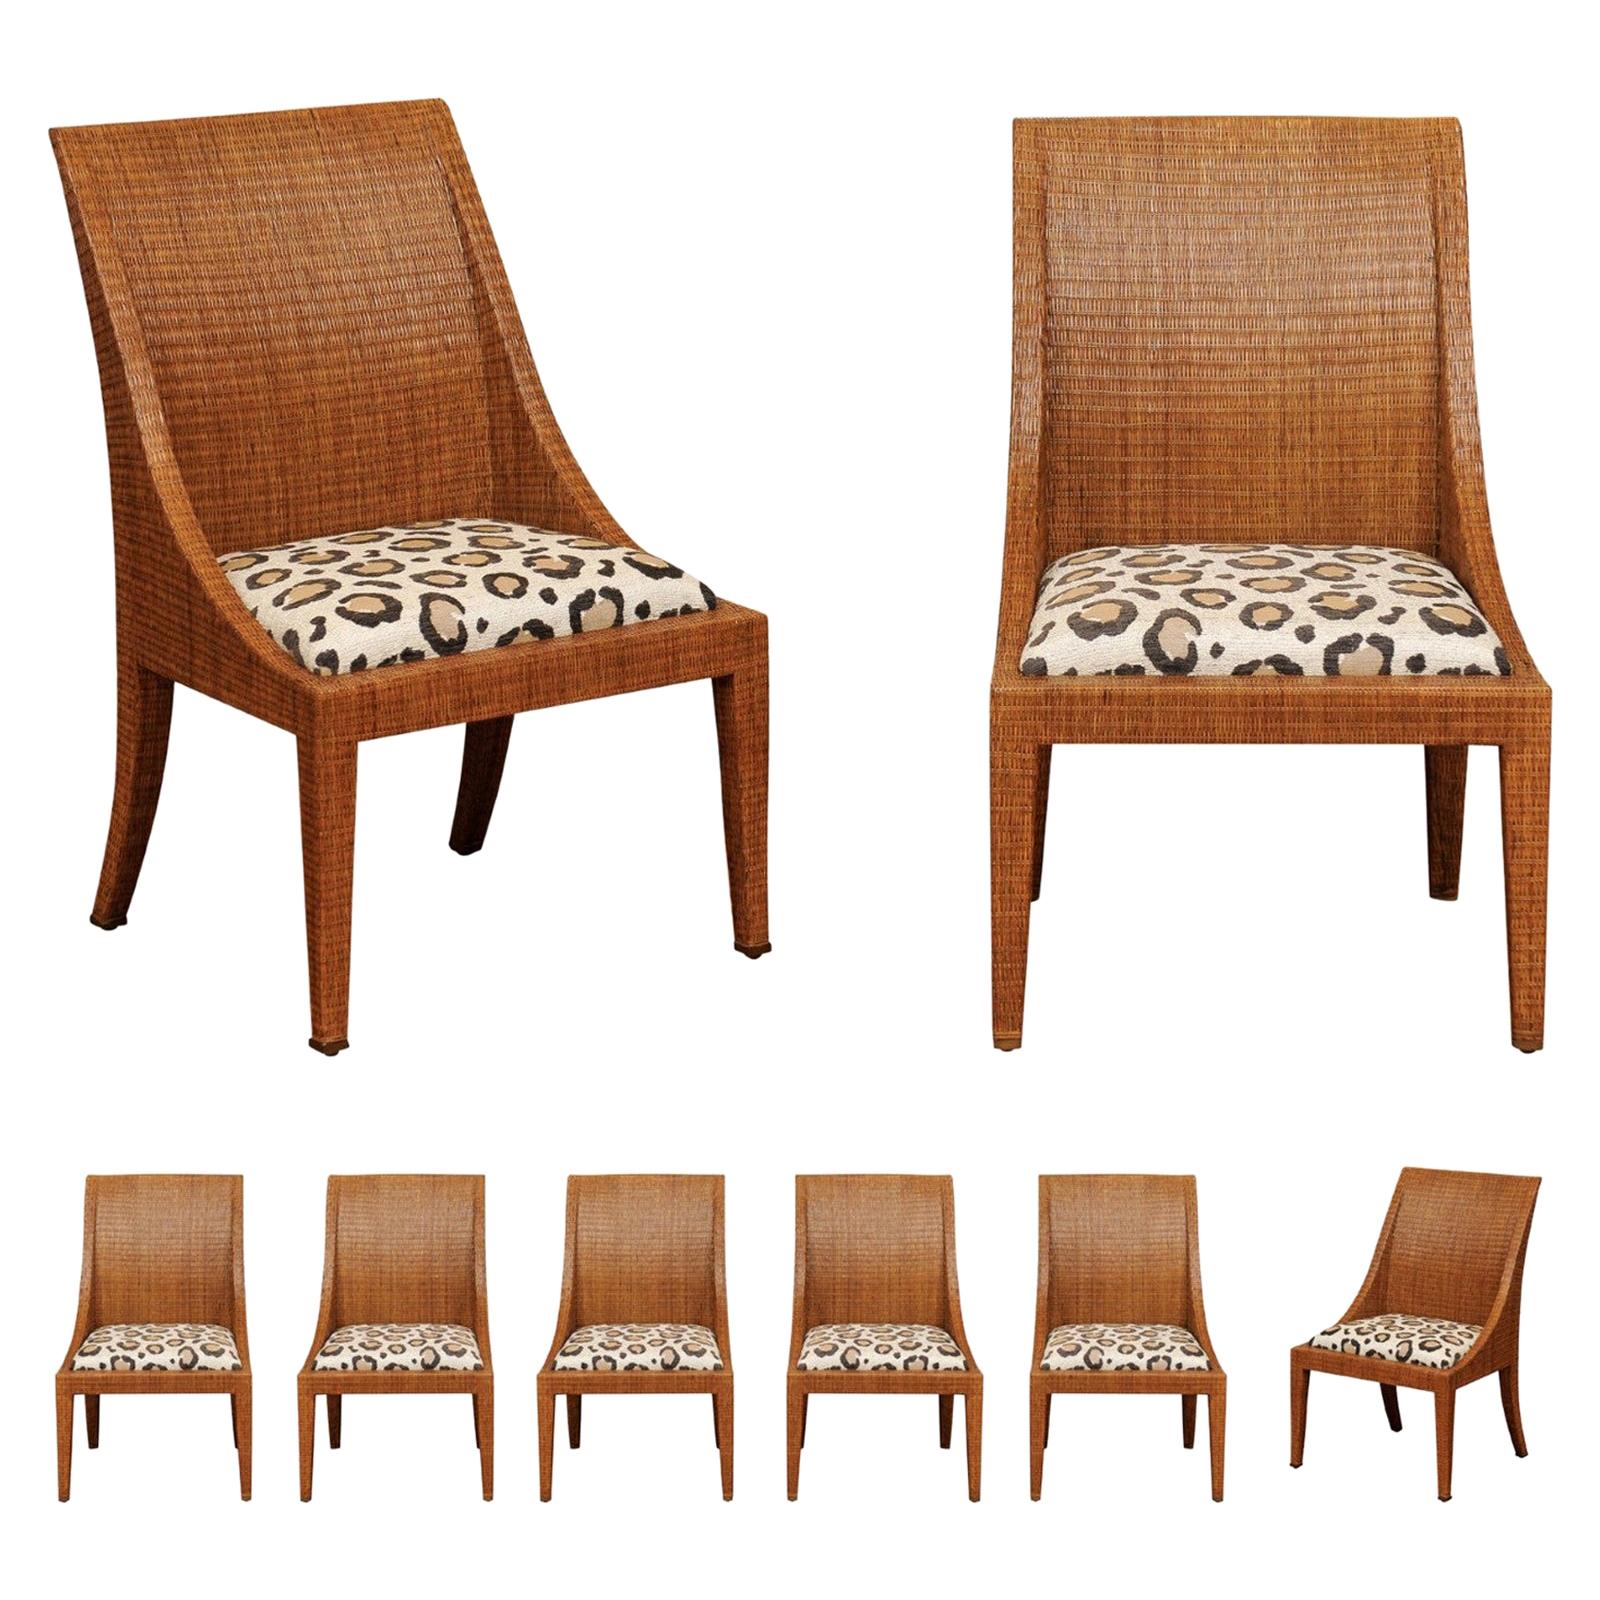 Elegant Restored Set of 10 Cane Dining Chairs by McGuire